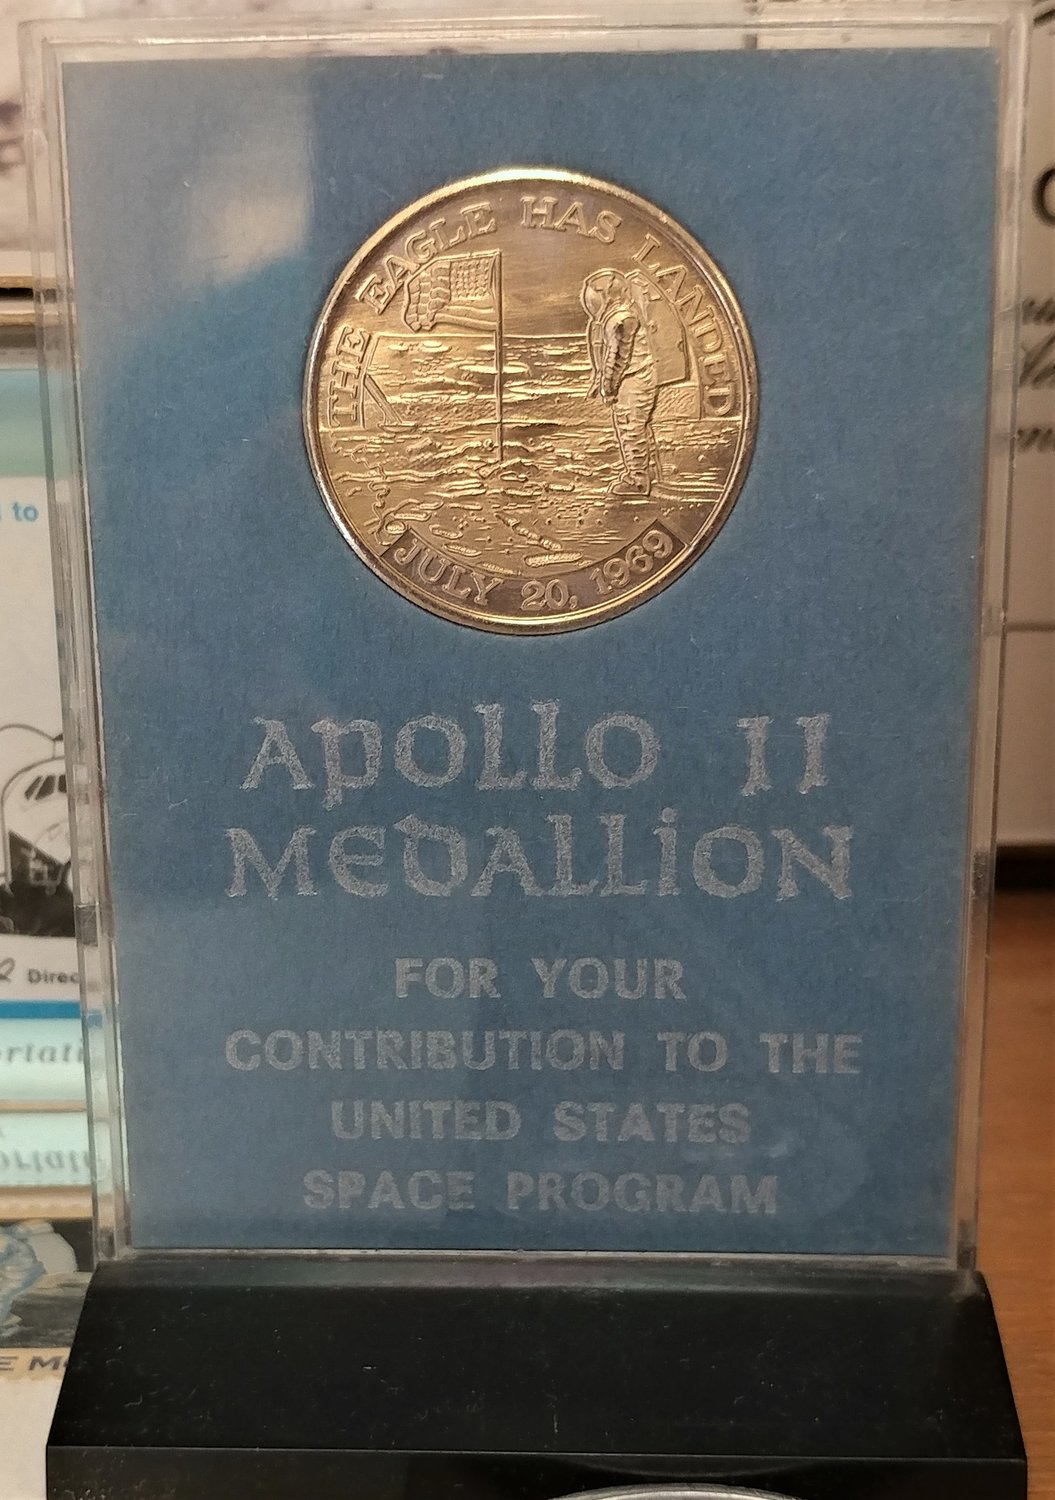 The commemorative medallion Ray Melton received for his contribution to the success of Apollo 11.